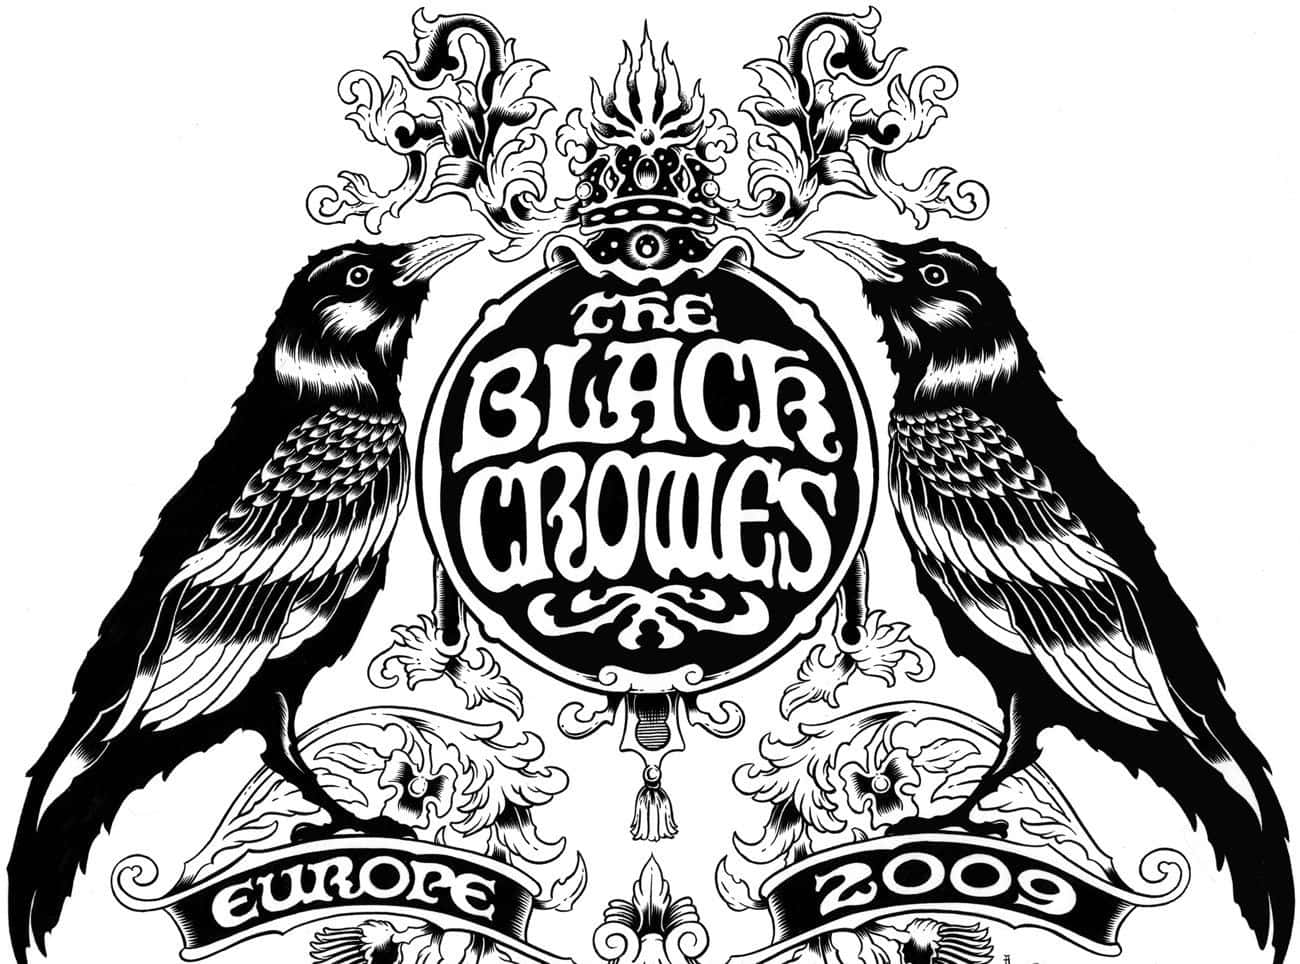 Legendary members of The Black Crowes, Chris Robinson and Rich Robinson Wallpaper